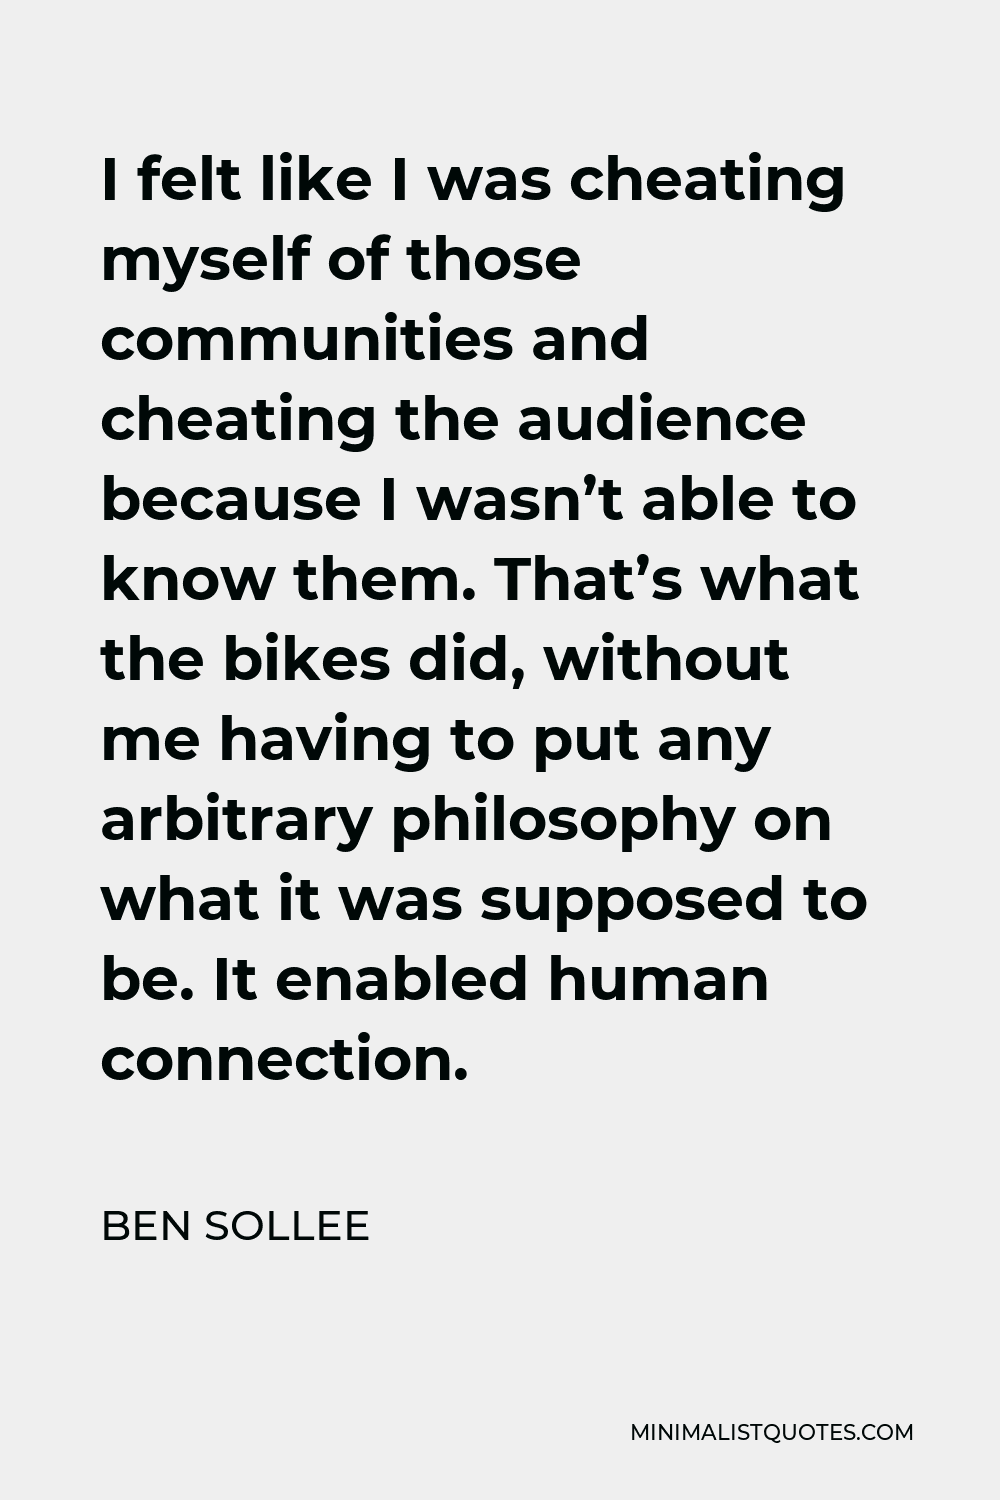 Ben Sollee Quote - I felt like I was cheating myself of those communities and cheating the audience because I wasn’t able to know them. That’s what the bikes did, without me having to put any arbitrary philosophy on what it was supposed to be. It enabled human connection.